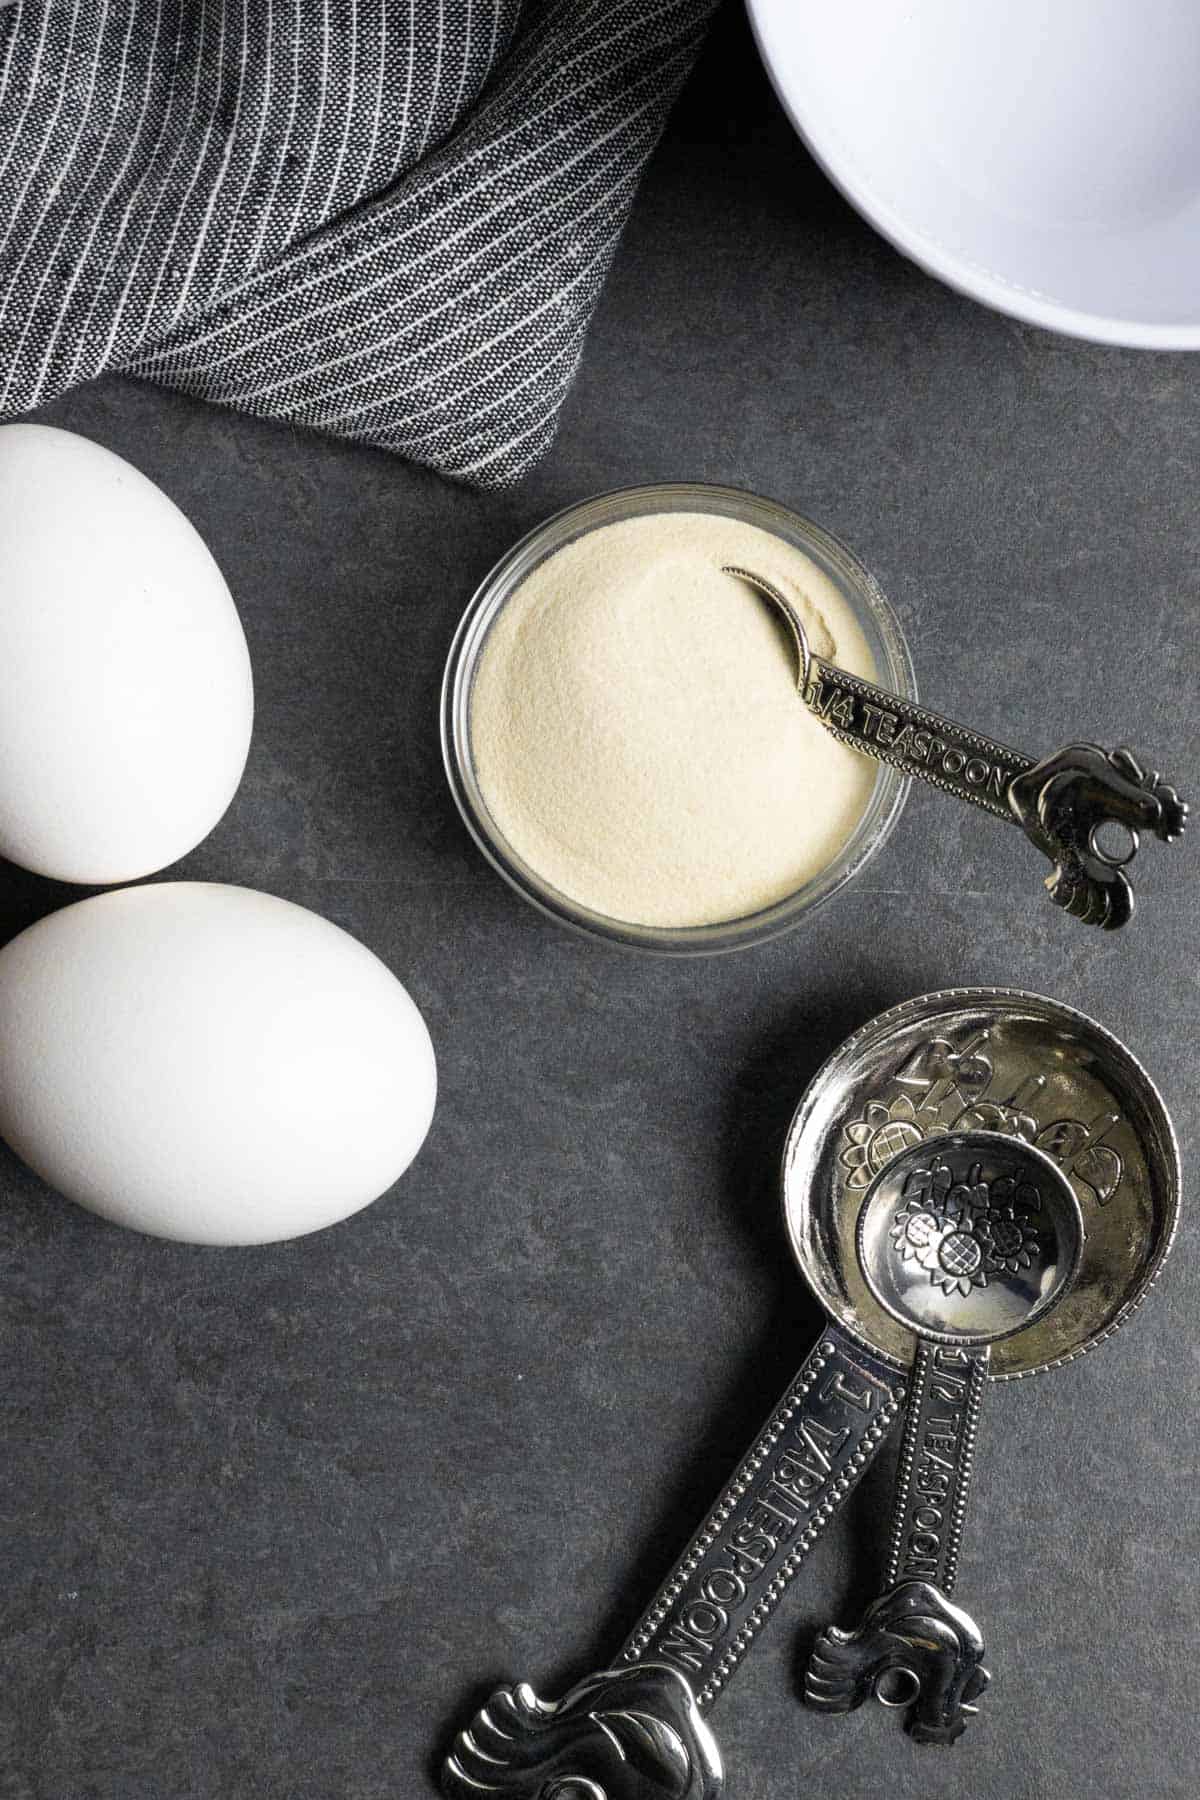 Xanthan gum on a grey board with two whole eggs, three measuring spoons, and a mixing bowl.